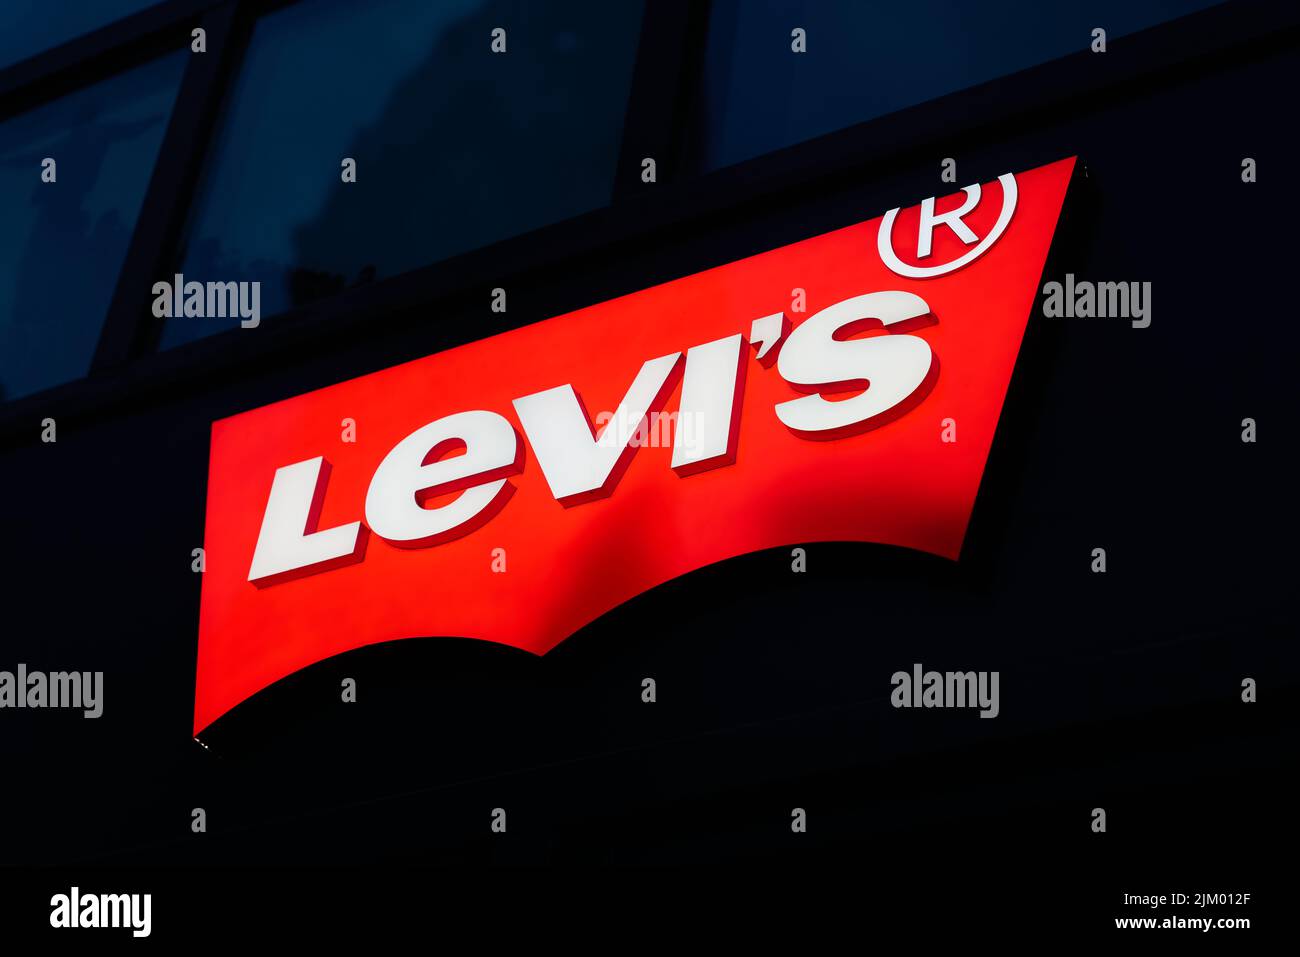 Branch of the brand Levis, the company Levi Strauss & Co in the center of Berlin Stock Photo